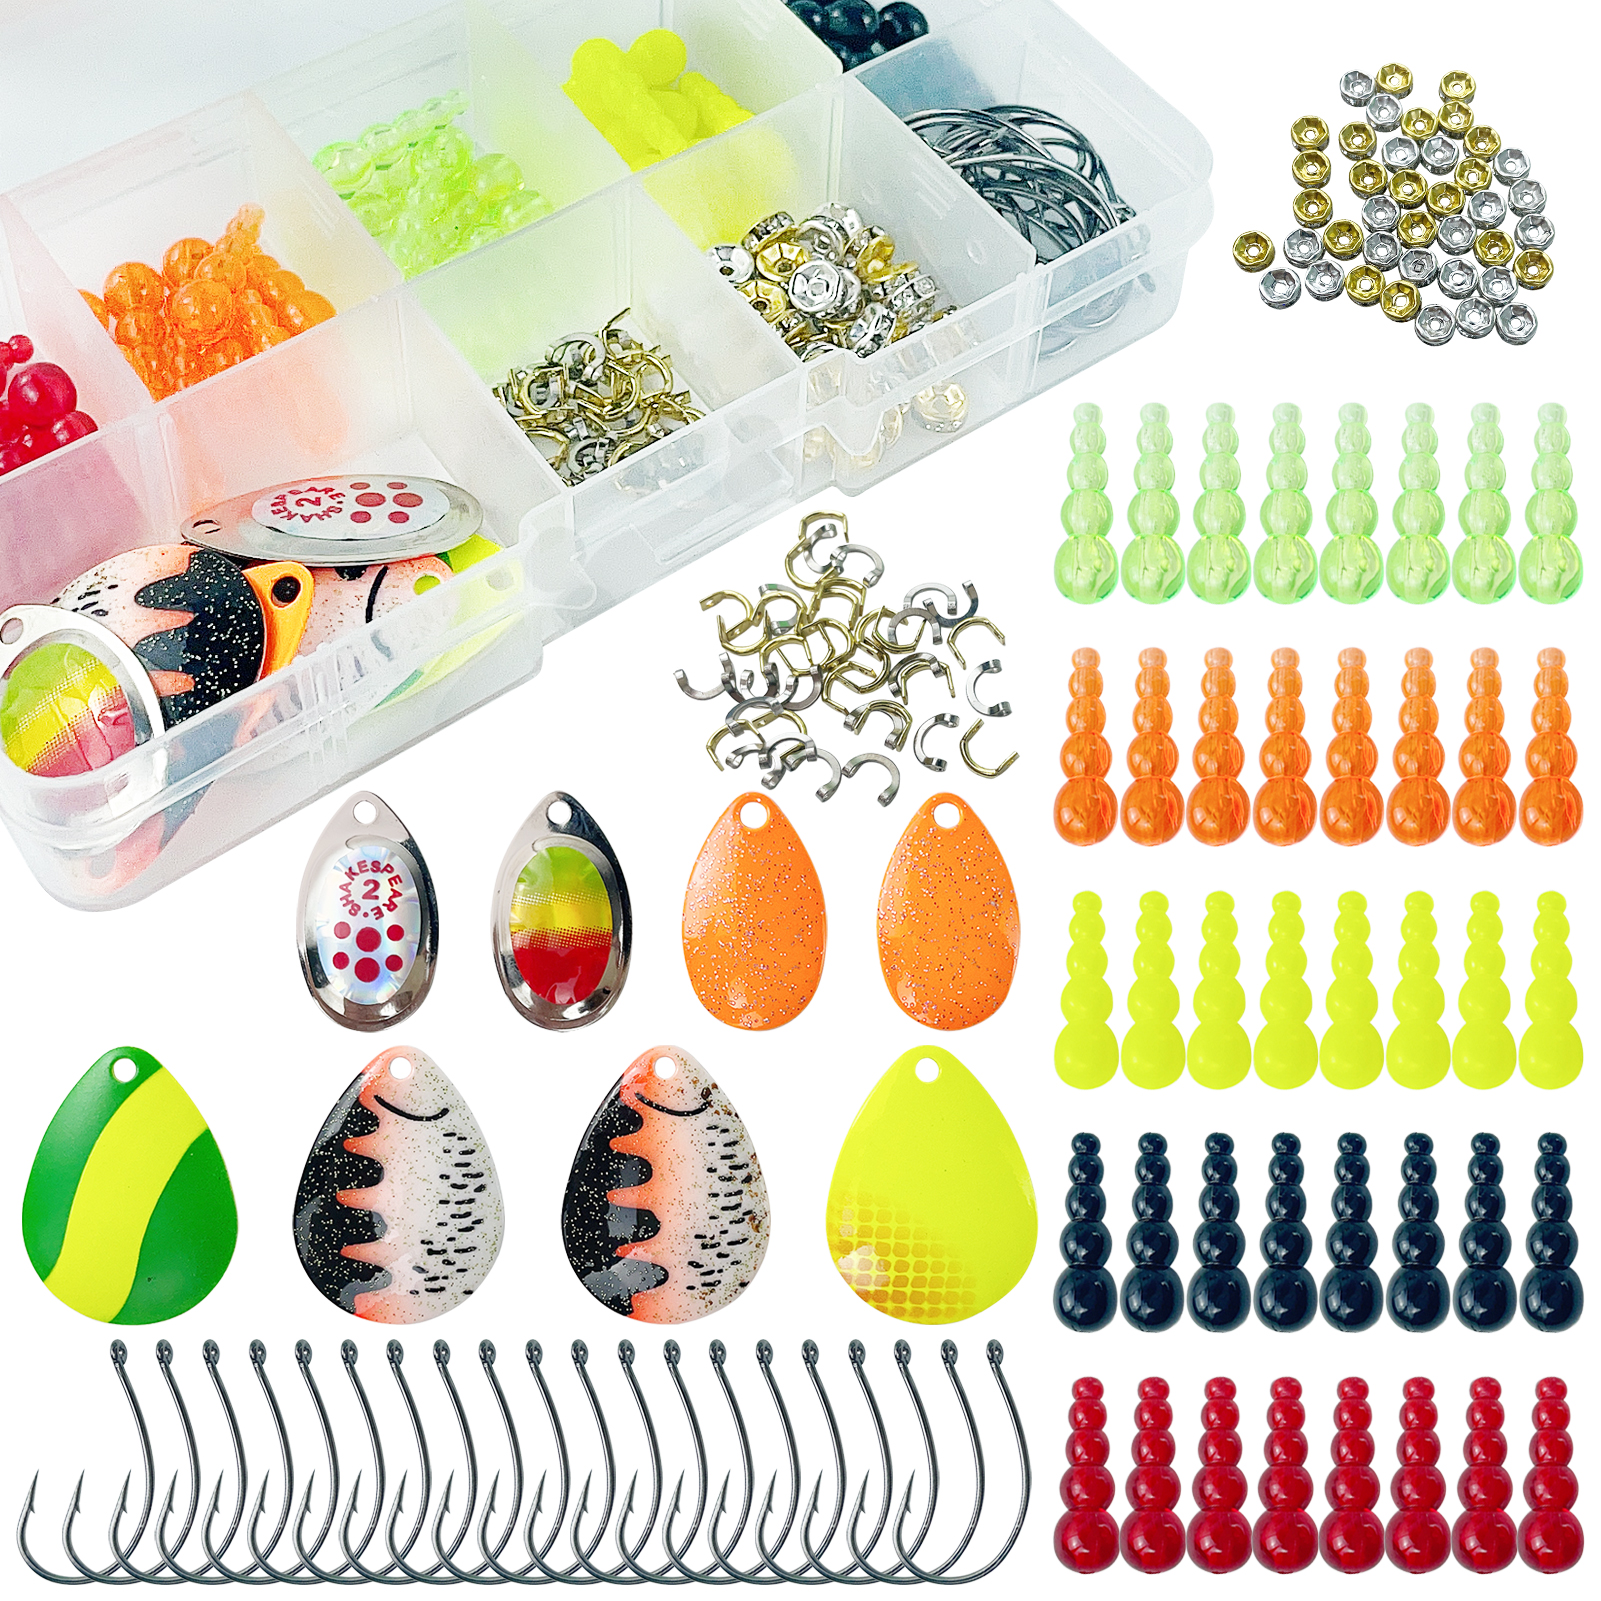 FREE FISHER 149-241pcs Fishing Spinners Set Beads Metal Sequins Hooks DIY Spinnerbaits Accessories Rooster Blades Tackle Box for Trout/Bass